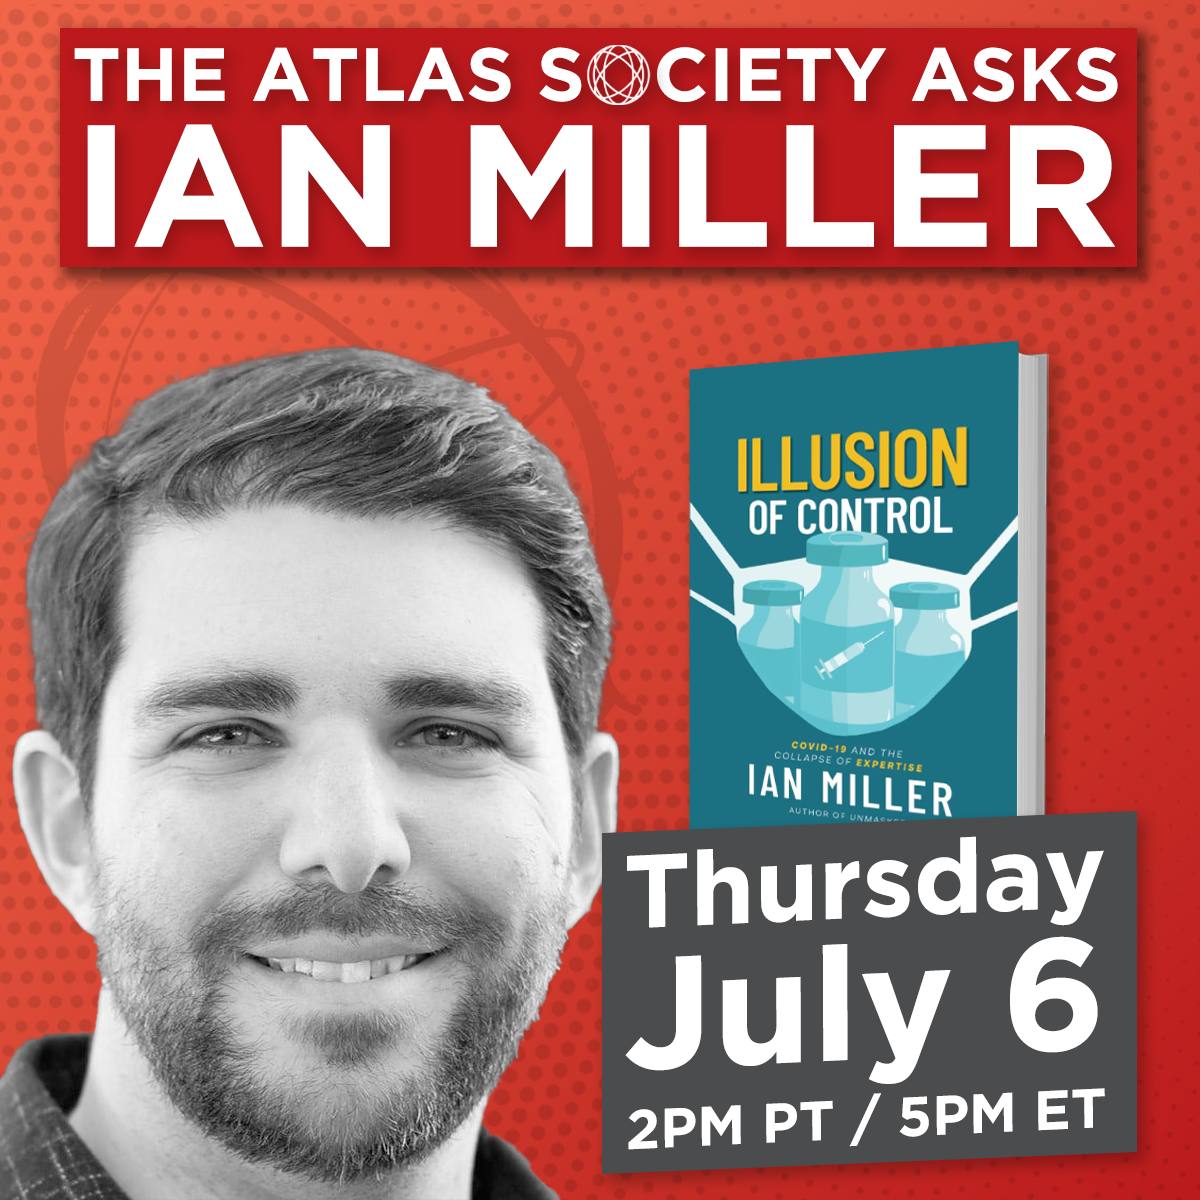 The Illusion of Control: The Atlas Society Asks Ian Miller